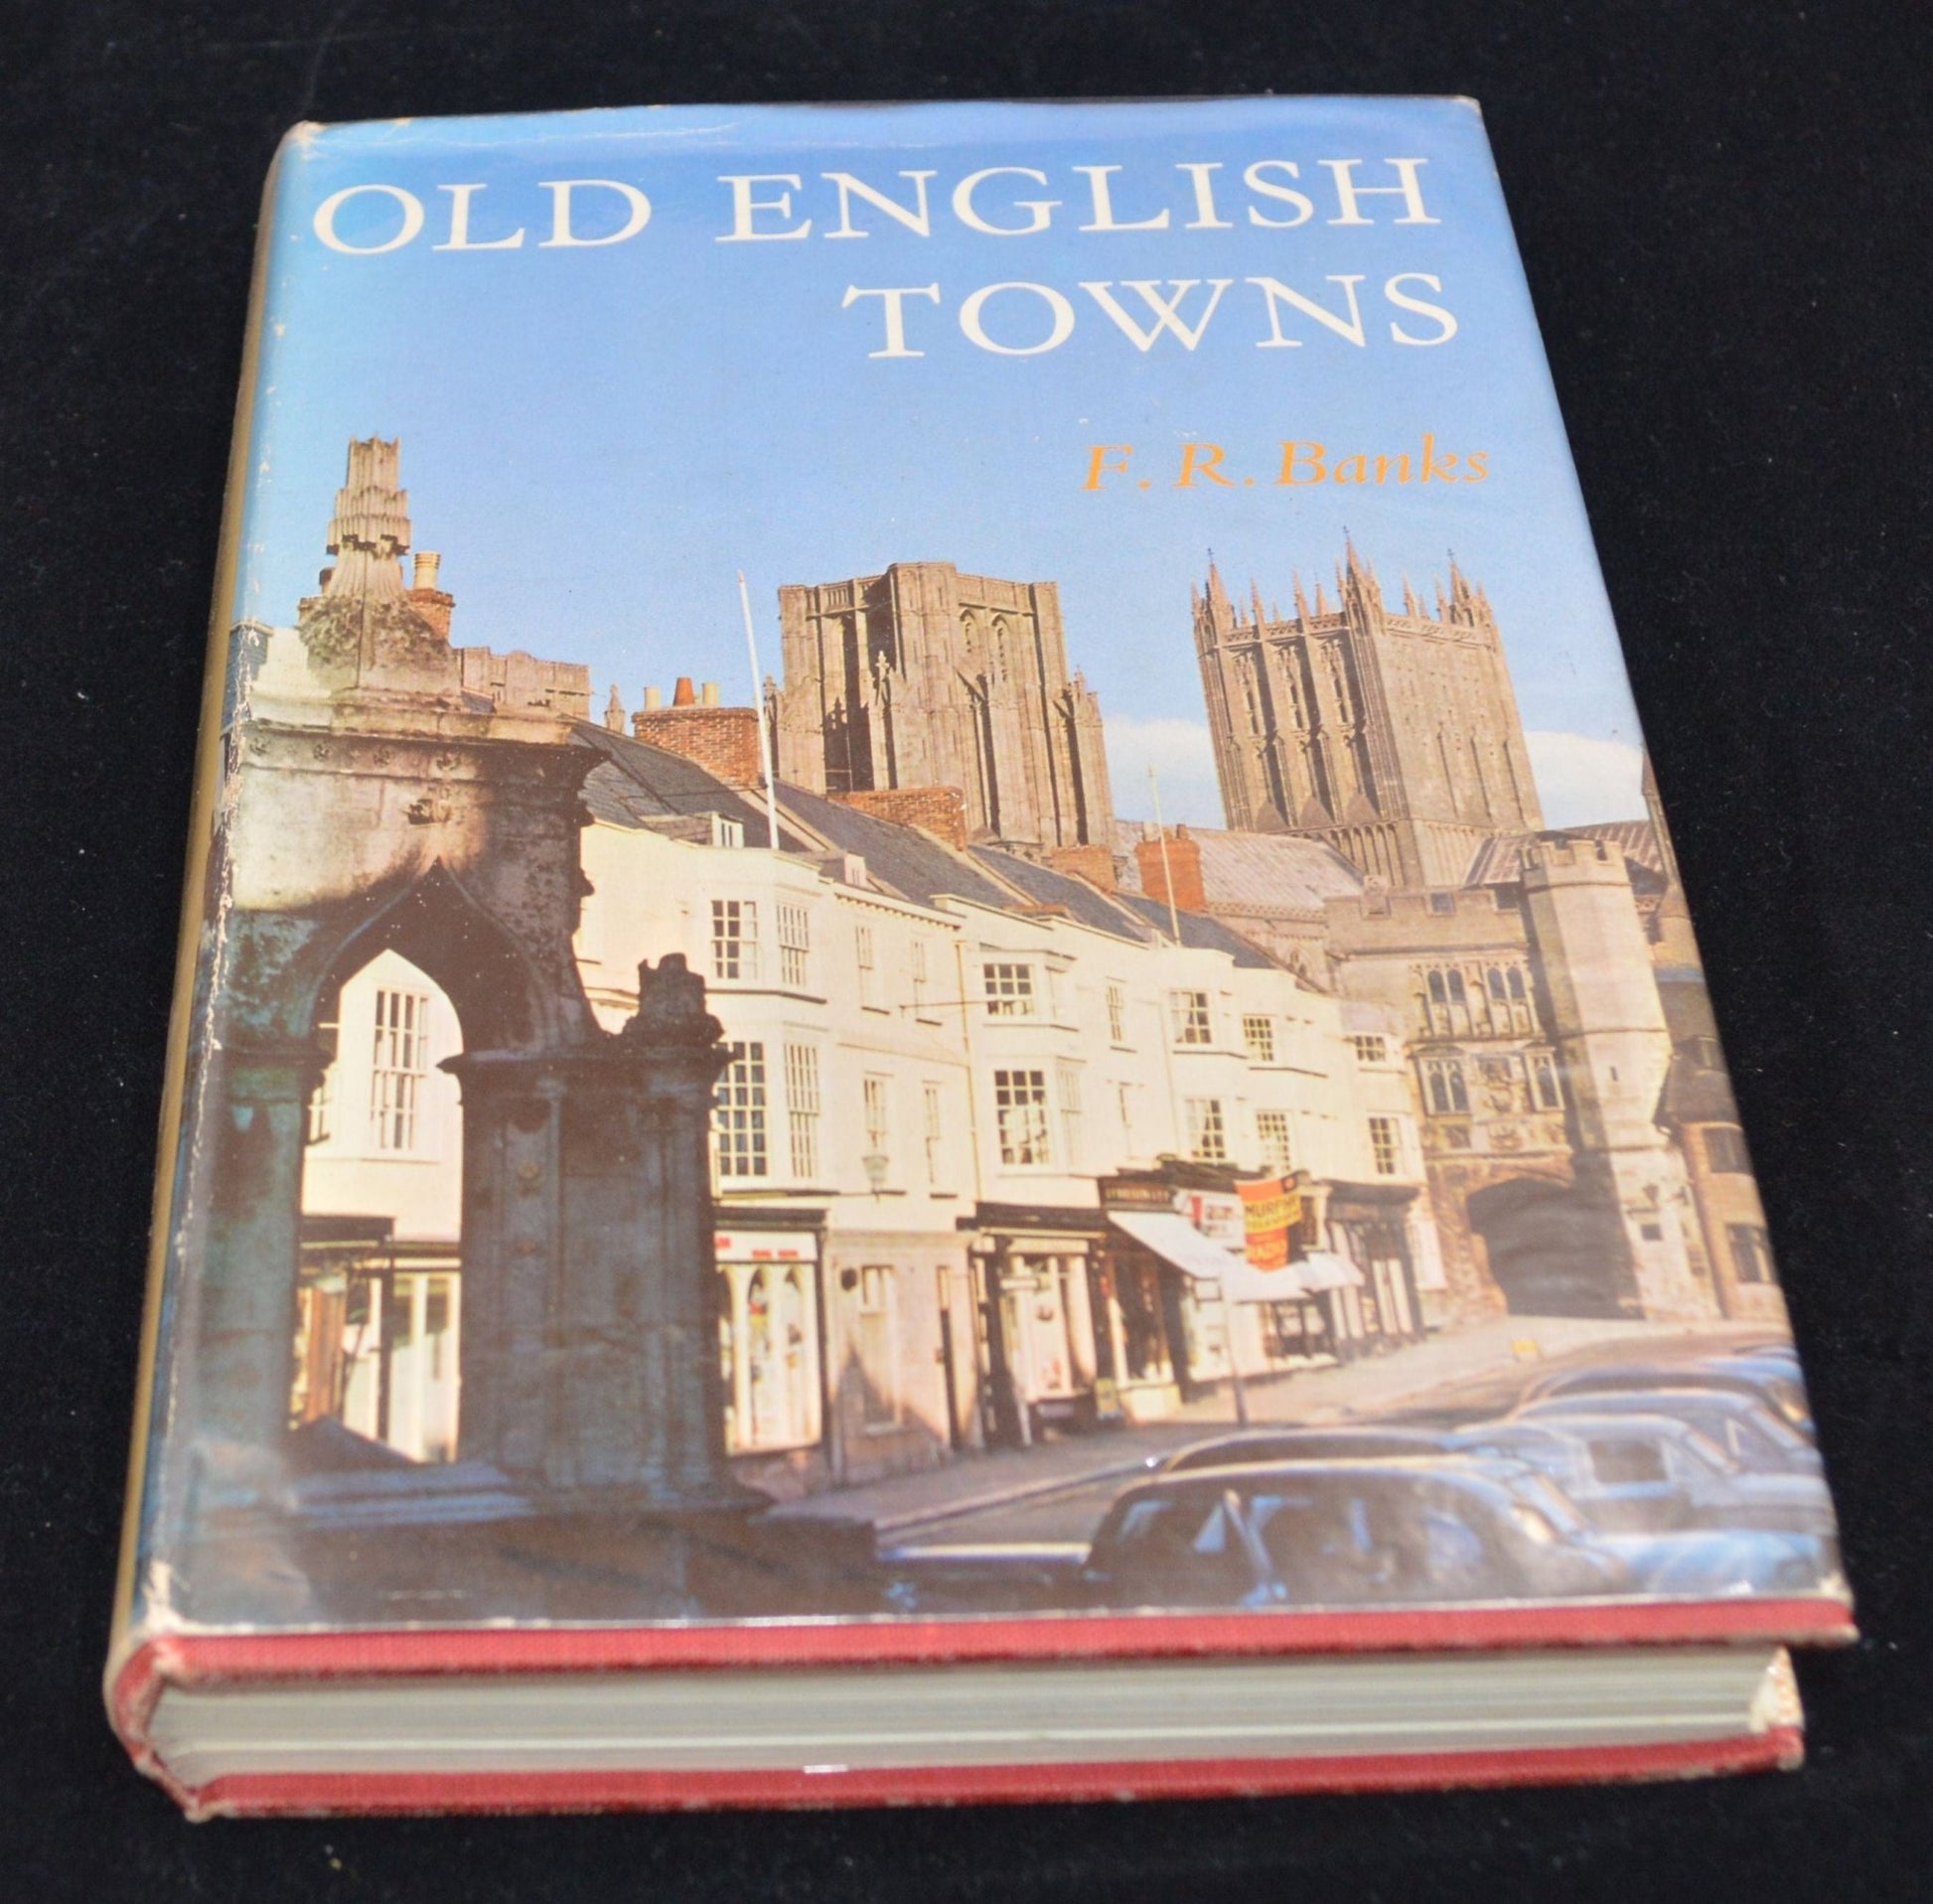 SECONDHAND BOOK OLD ENGLISH TOWNS by F.R. BANKS GOOD CONDITION - TMD167207